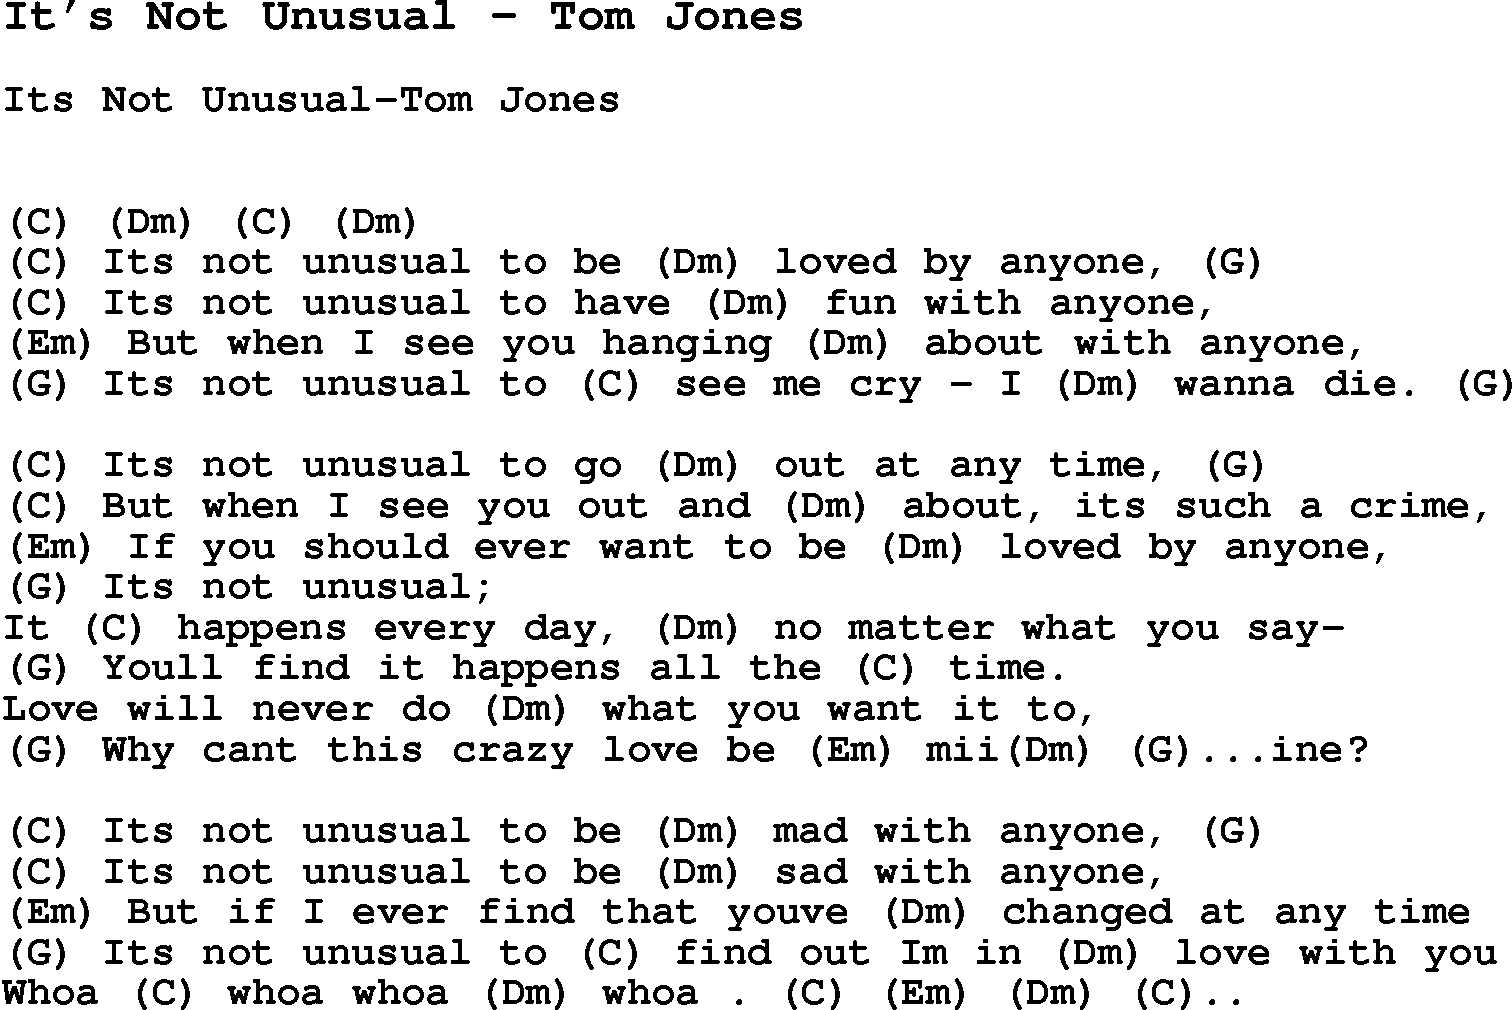 Song It’s Not Unusual by Tom Jones, with lyrics for vocal performance and accompaniment chords for Ukulele, Guitar Banjo etc.